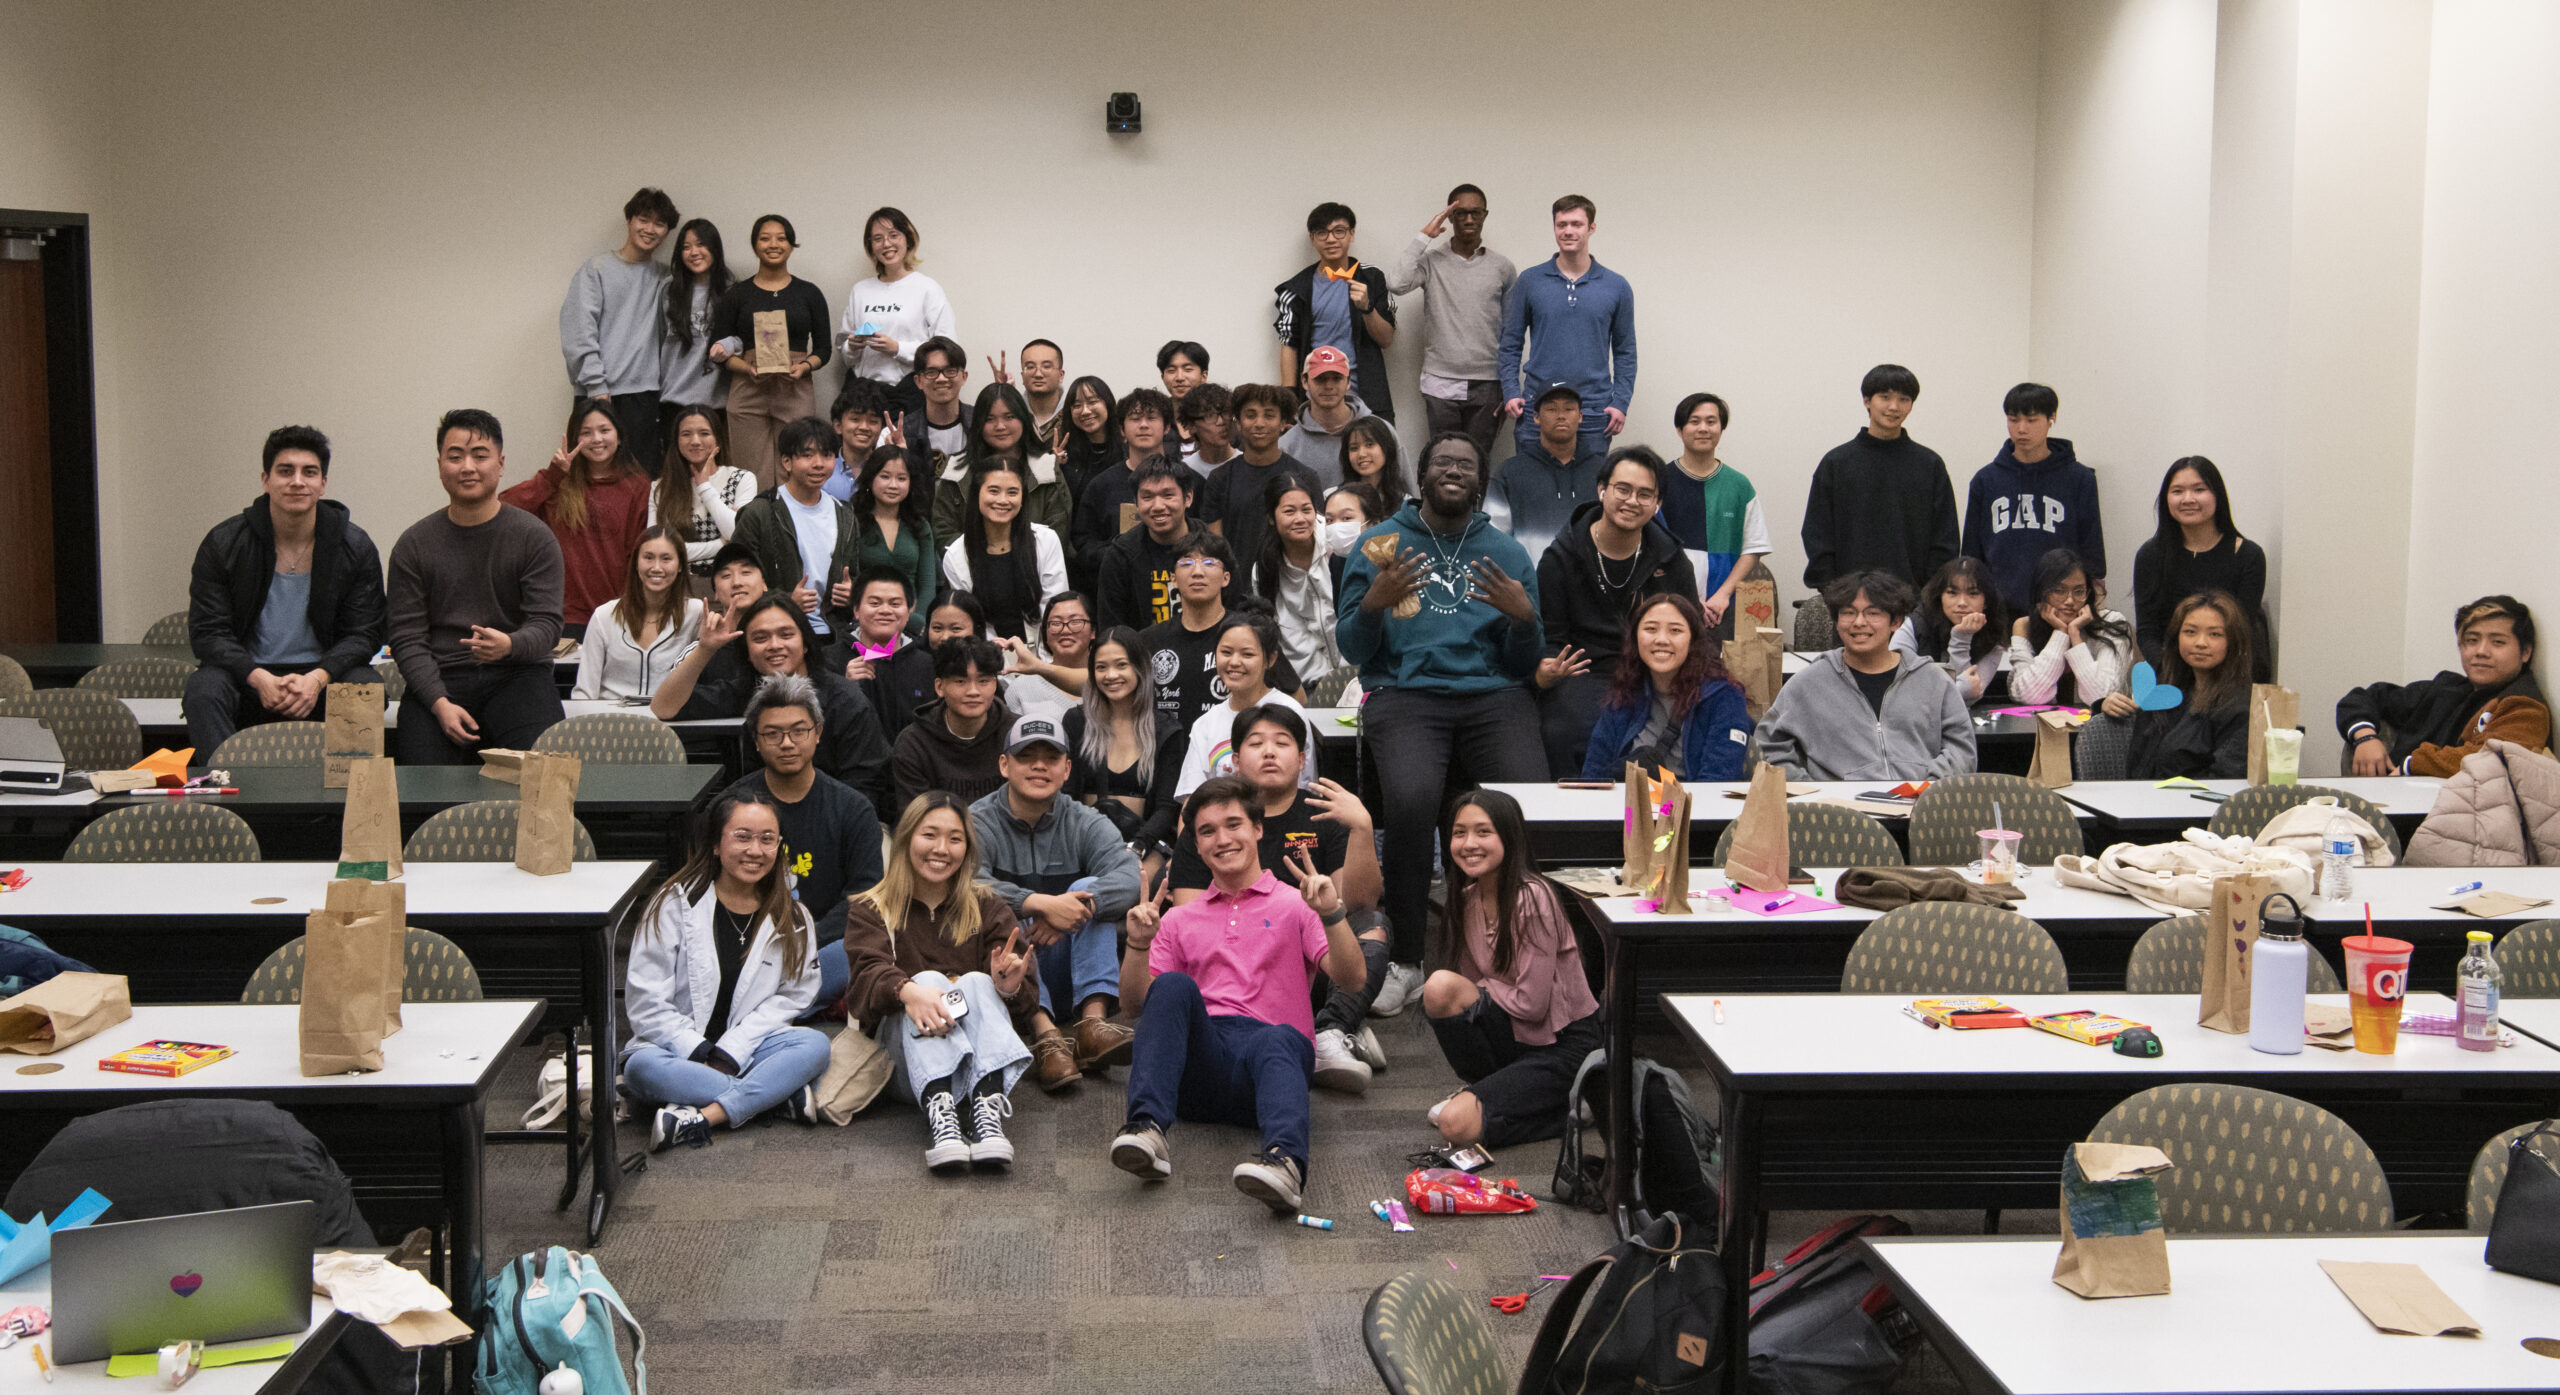 Members from the Vietnamese Student Association at KSU pose for a group photo during a GBM at Kennesaw State University, February 7, 2023.